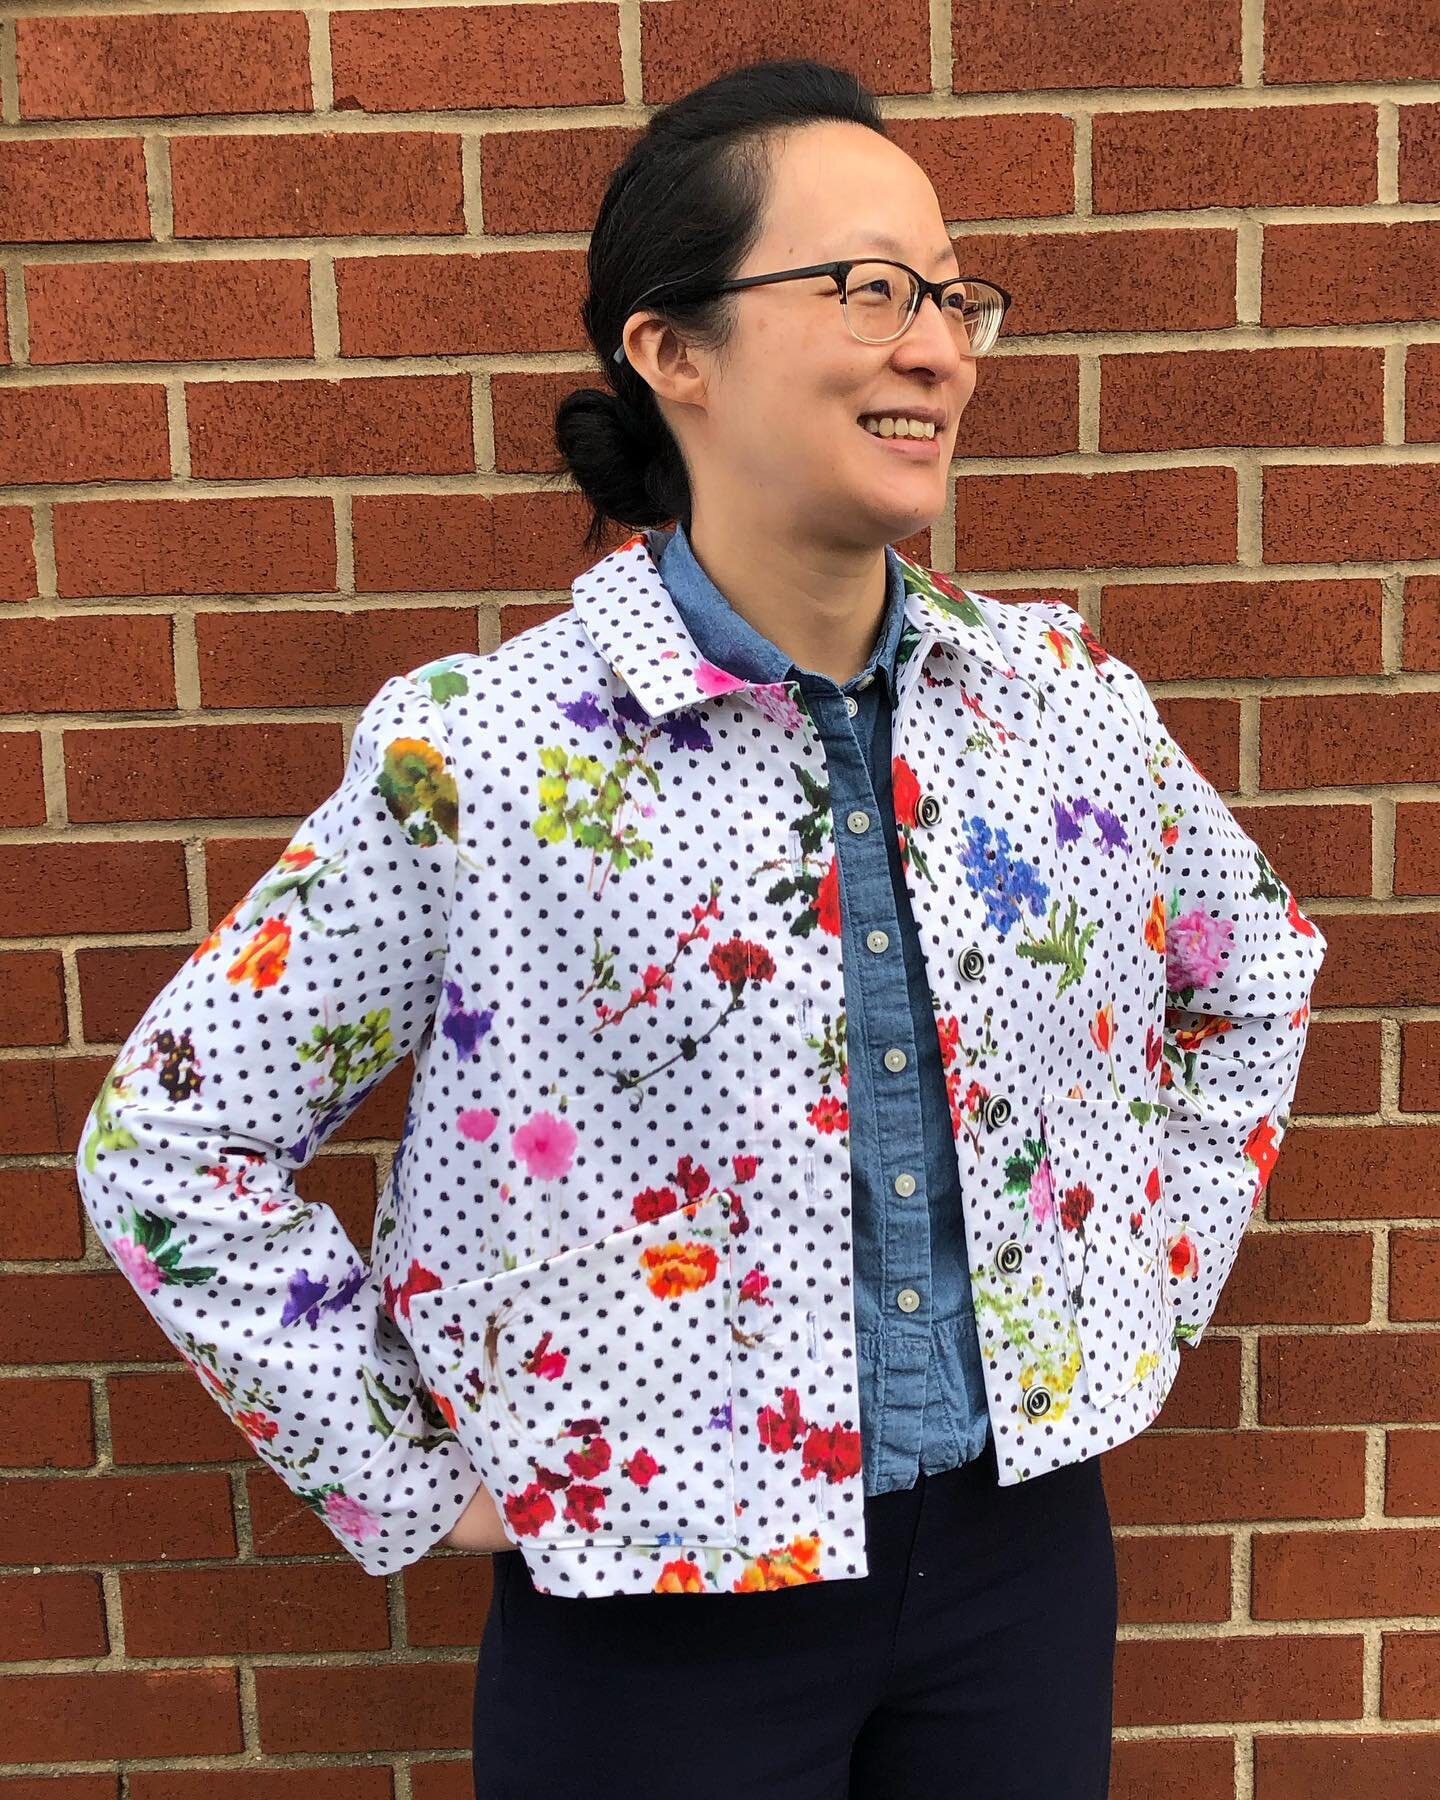 I have a new blog post up. I made this Seamwork Rhett jacket out of a half finished dress project that had been sitting in my unfinished project pile for years. I unearthed the dress project pieces in a moment of inspiration after listening to the Se